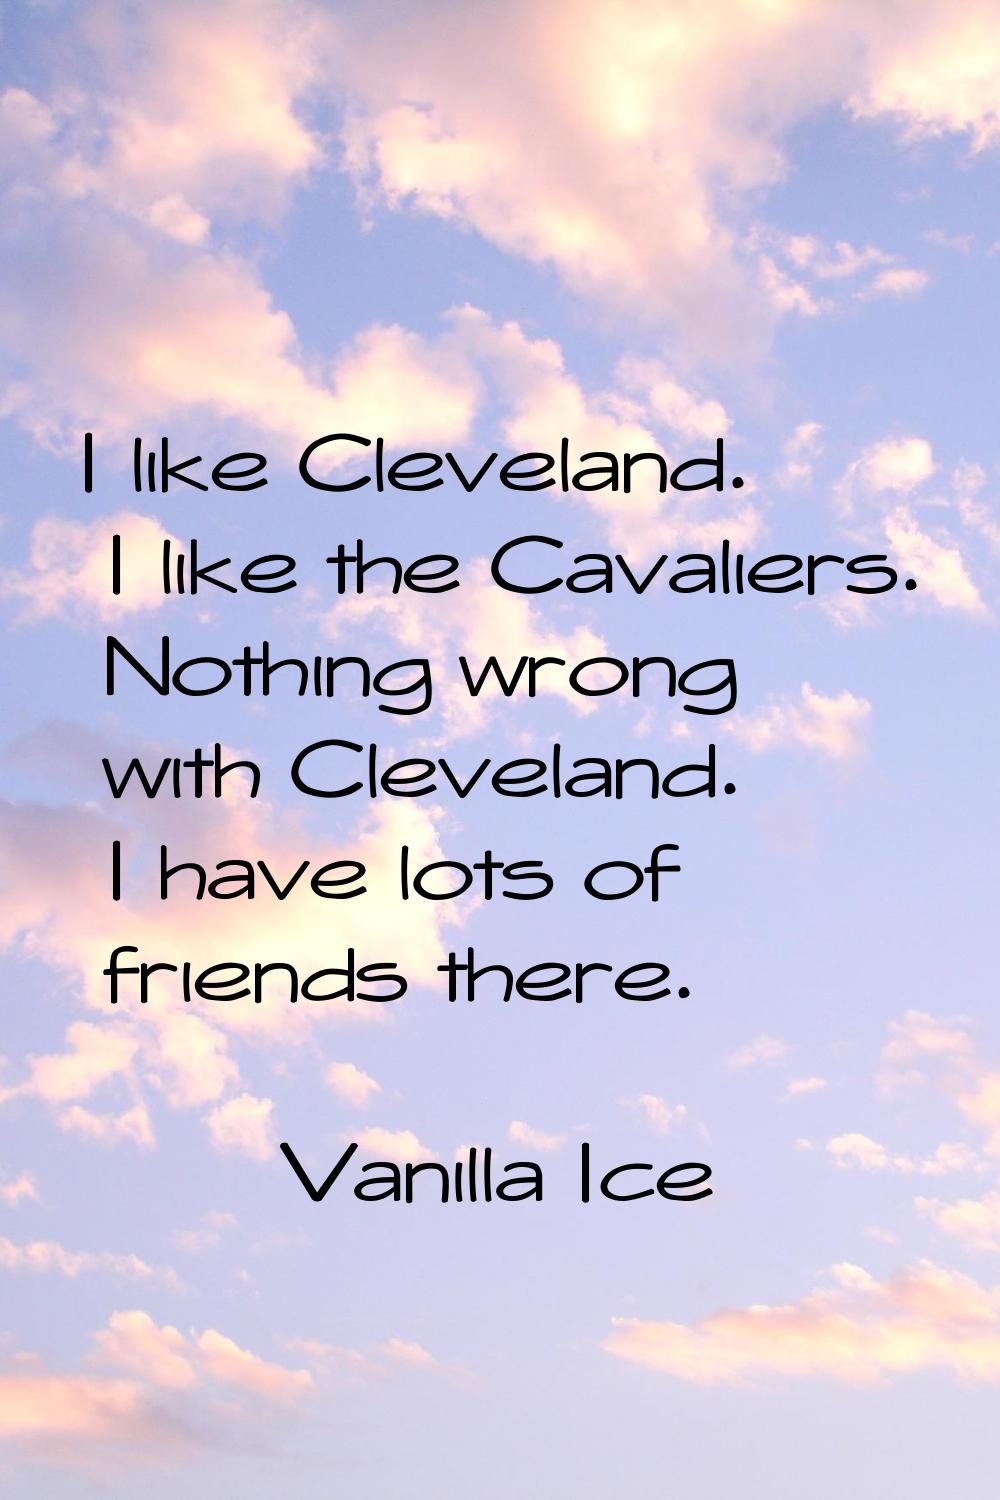 I like Cleveland. I like the Cavaliers. Nothing wrong with Cleveland. I have lots of friends there.